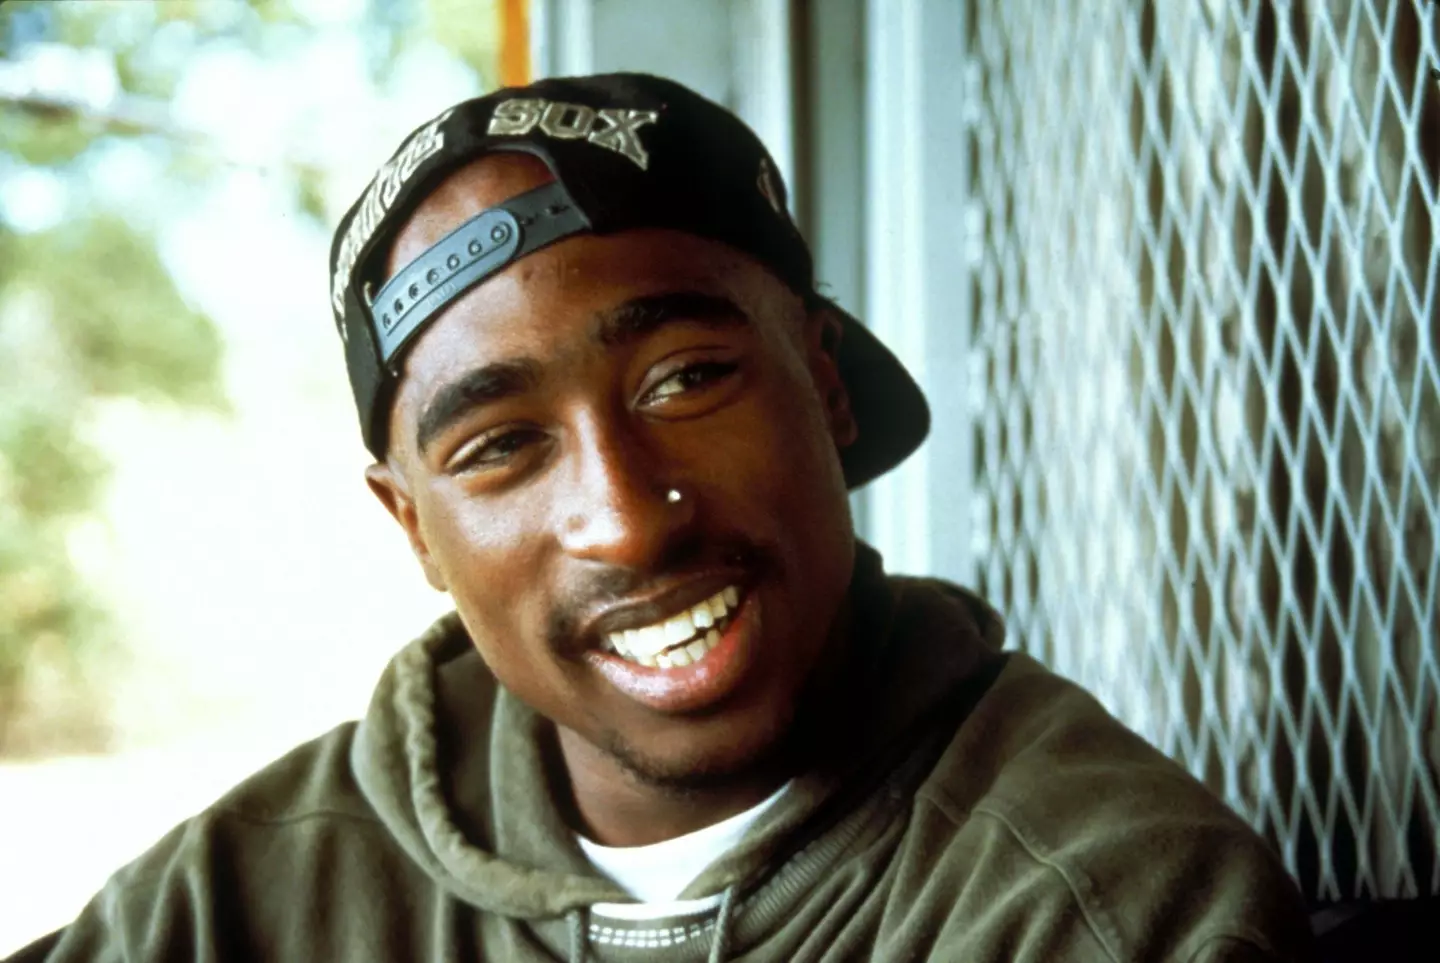 Tupac Shakur died in 1996, however his former friend Smooth B explained the rapper predicted he wouldn't make it past the age of 25 and wouldn't have children.